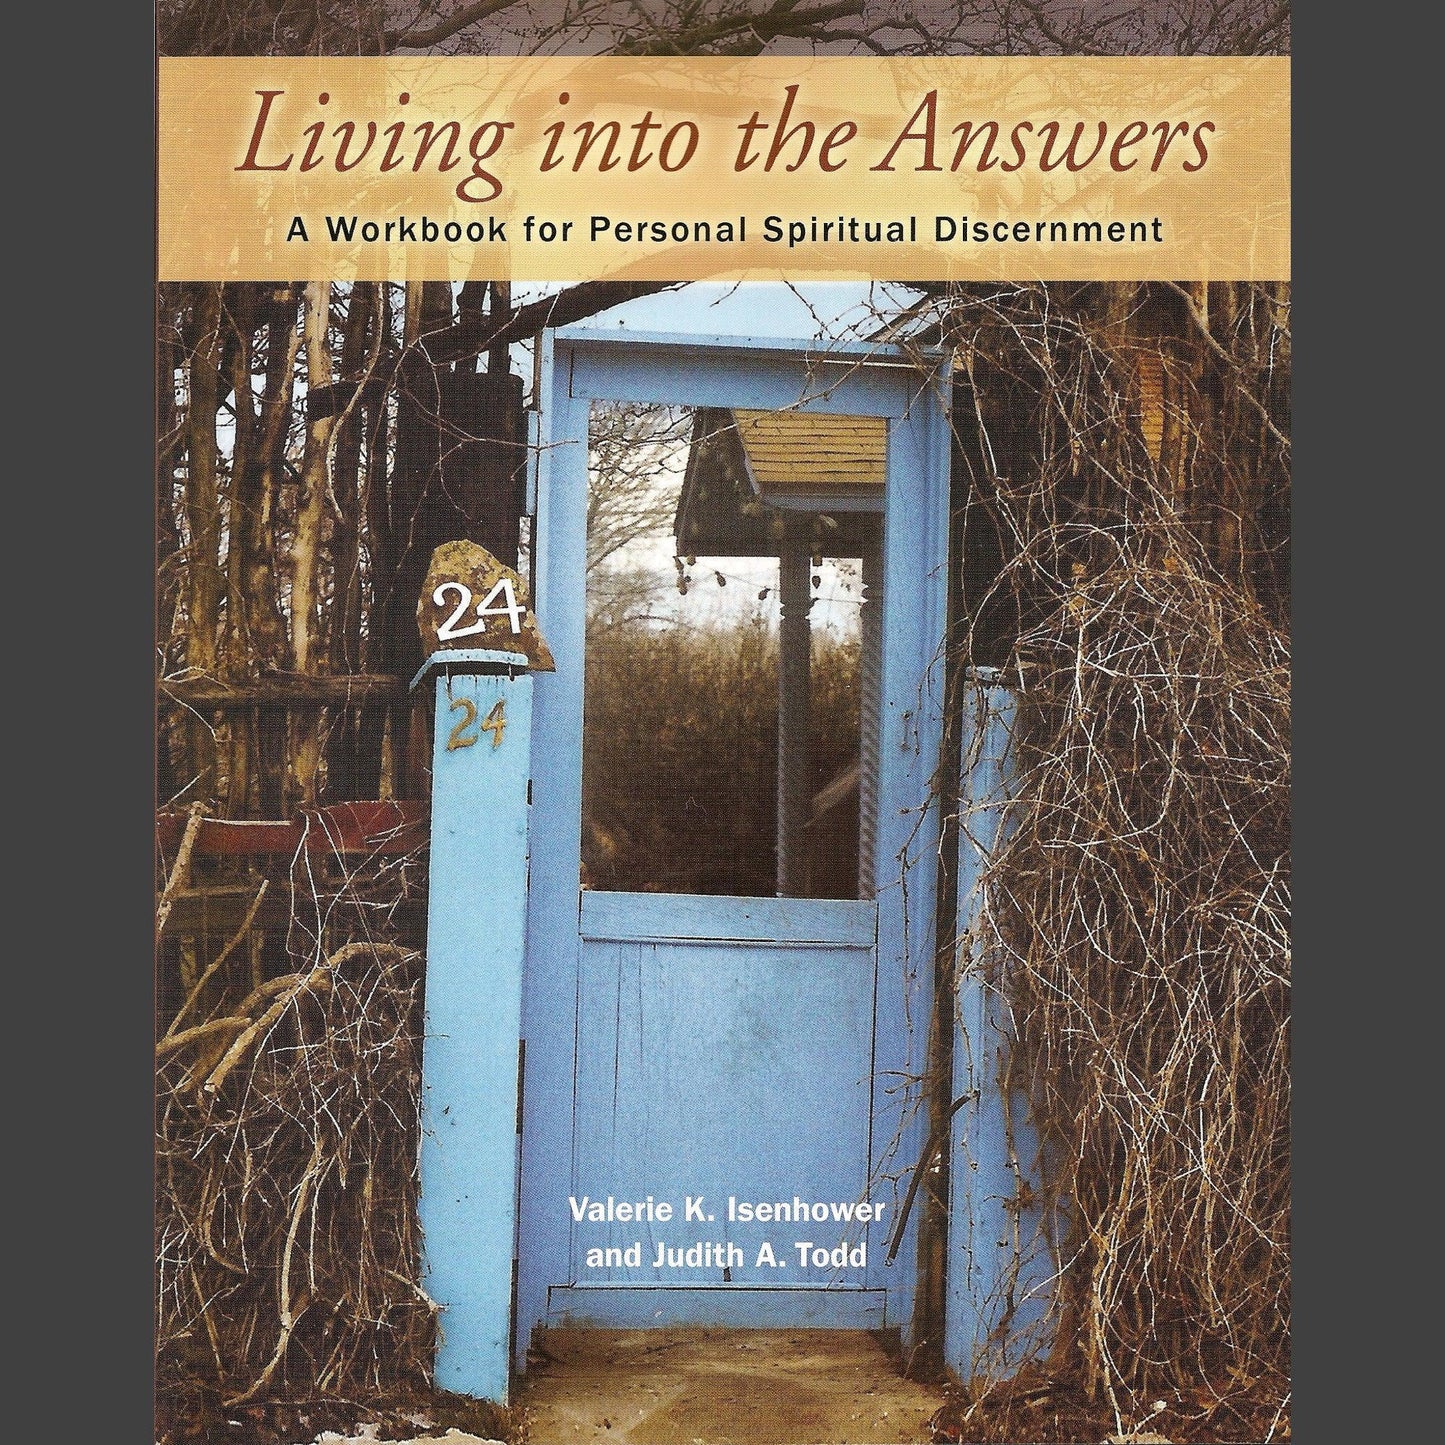 living-into-the-answers-v-isenhower-photography - V. Isenhower Photography